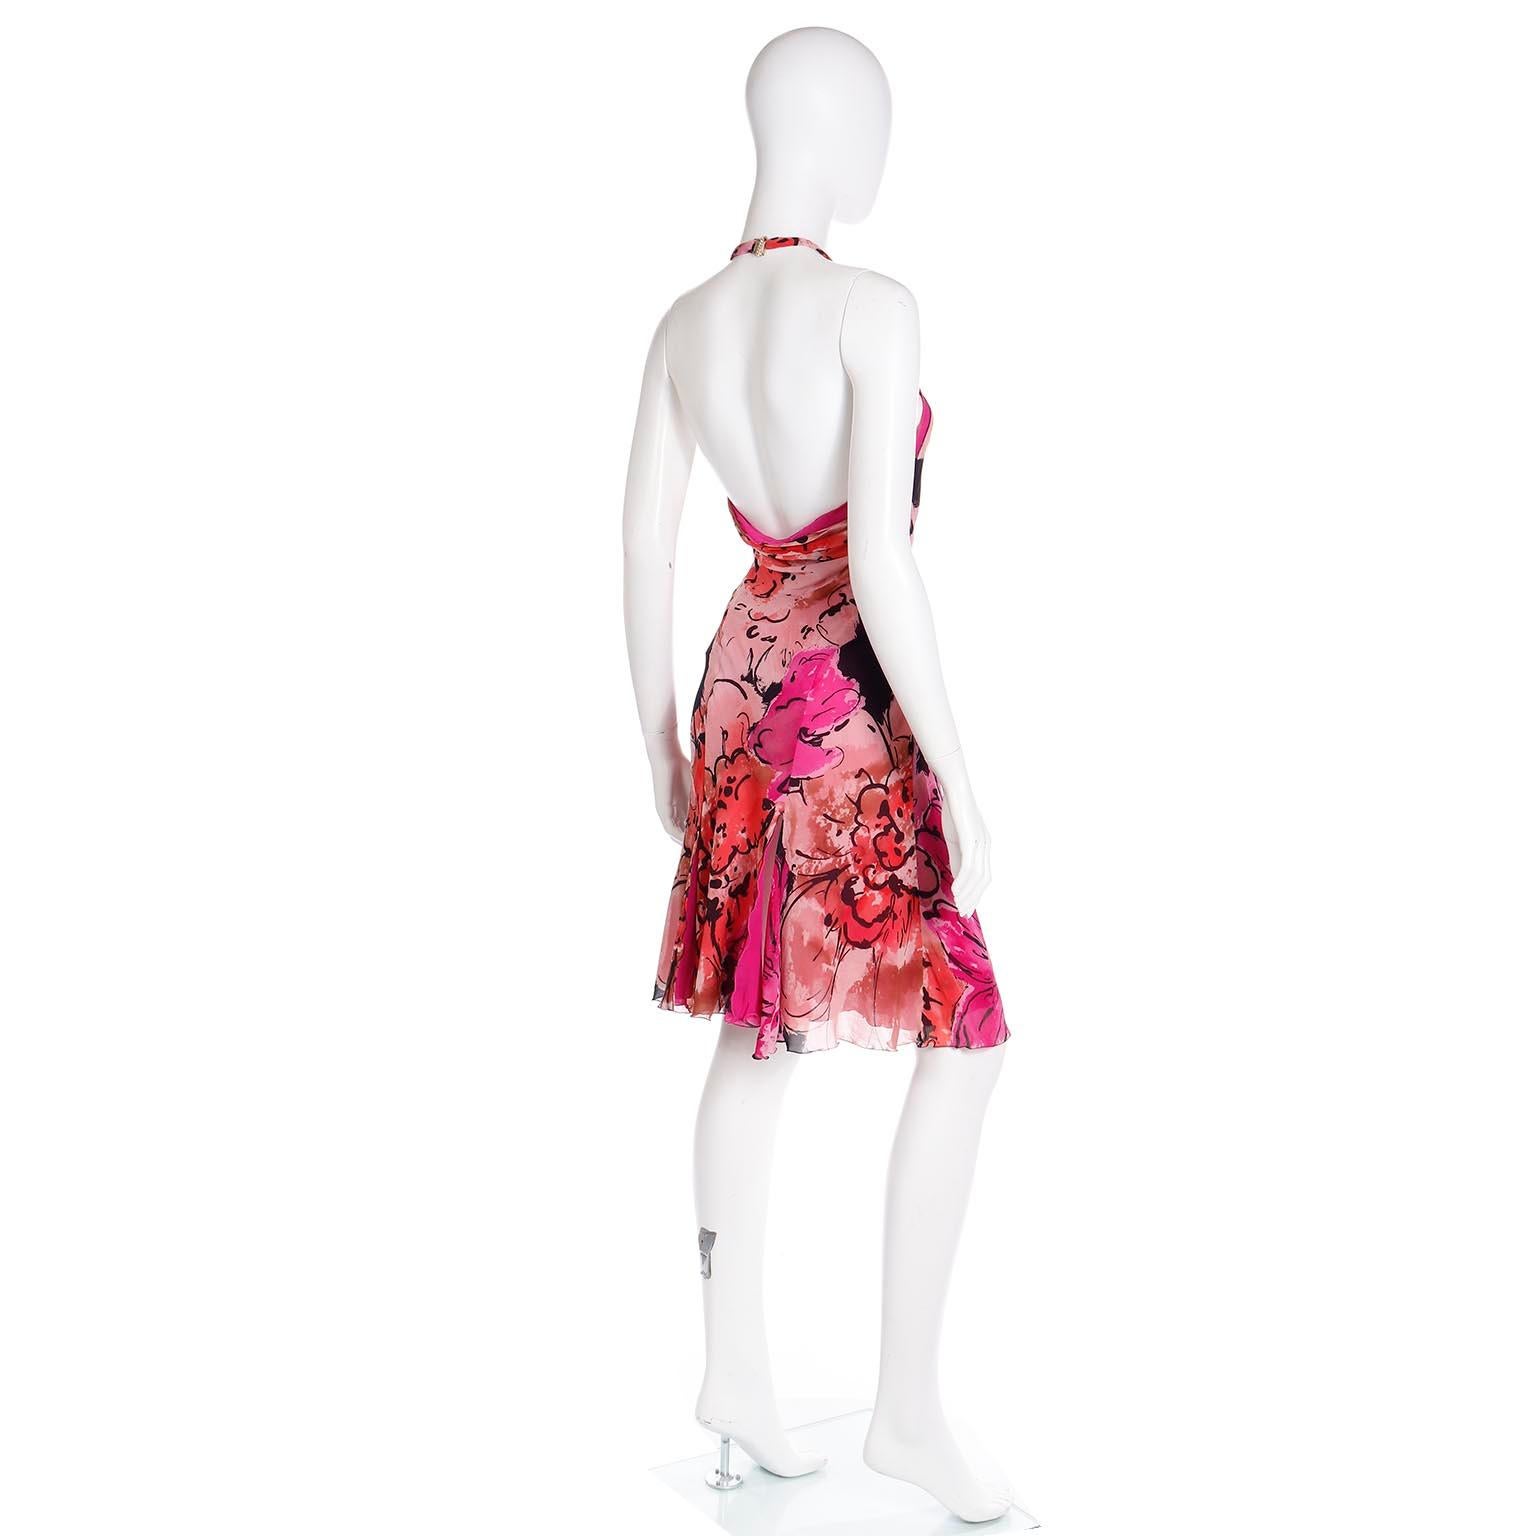 2000s Gianni Versace Silk Floral HIgh Slit Halter Dress In Excellent Condition For Sale In Portland, OR